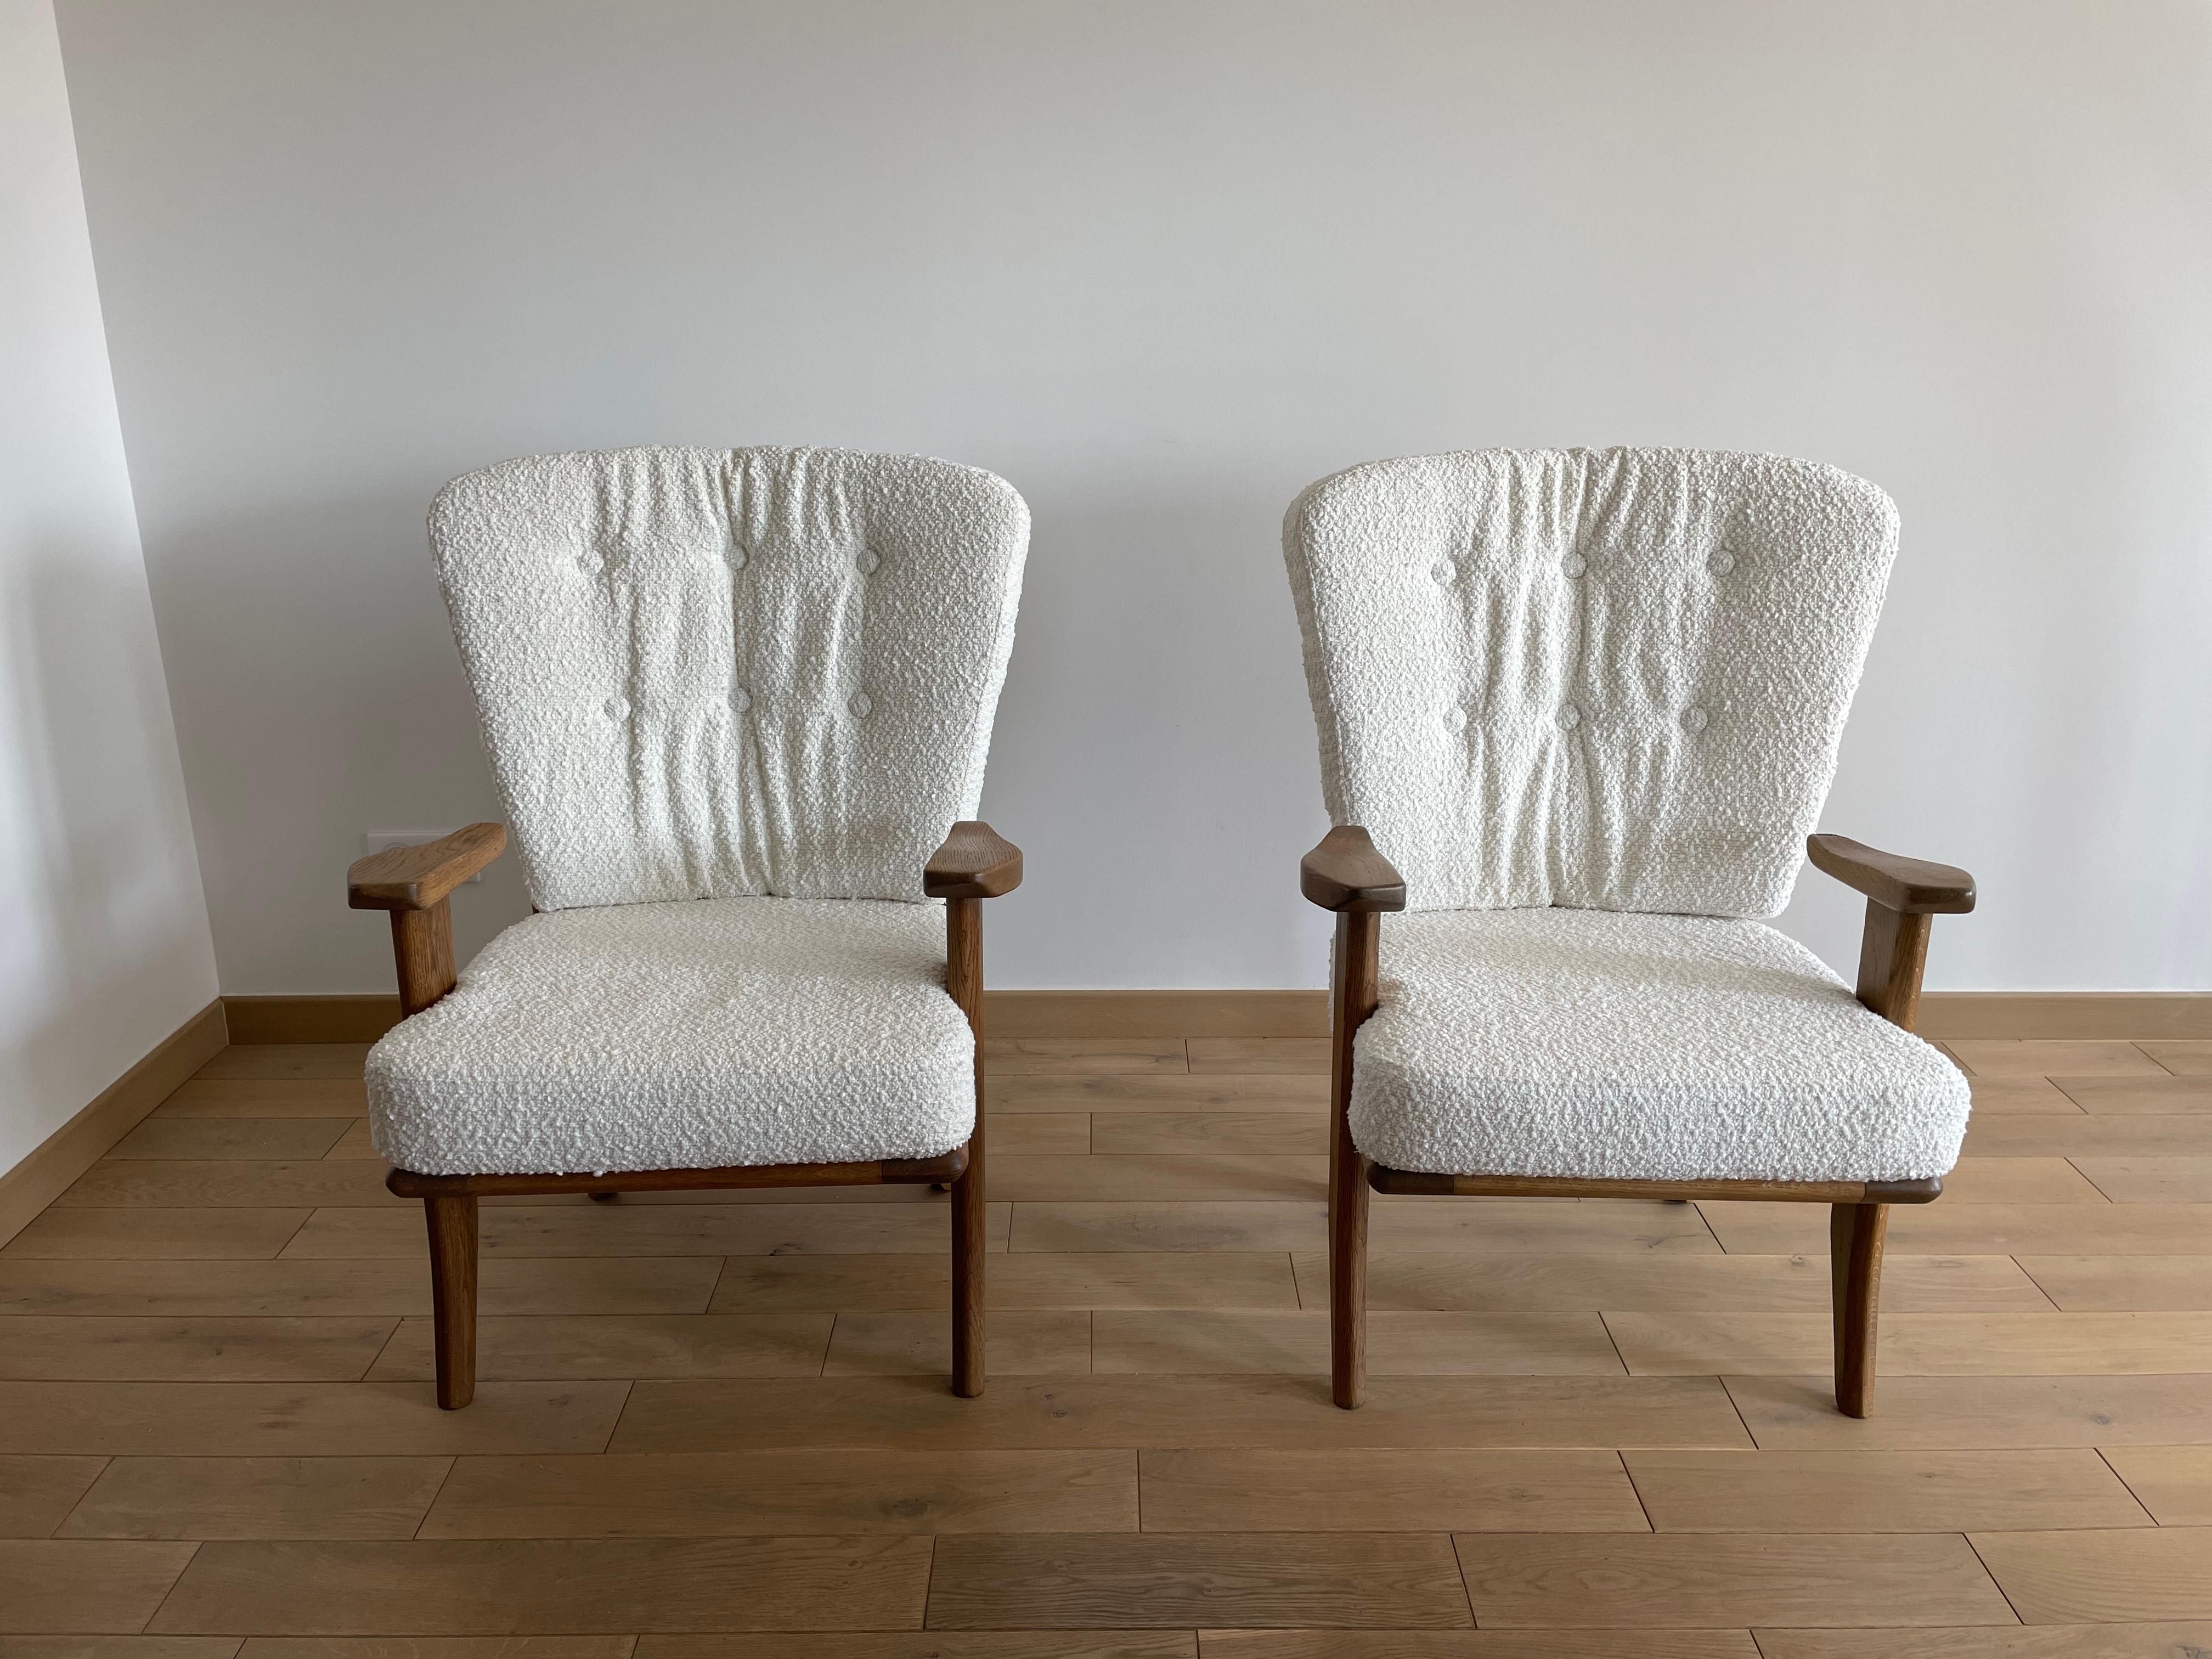 Pair of French Oak Armchairs by Guillerme et Chambron, France, 1960s For Sale 3